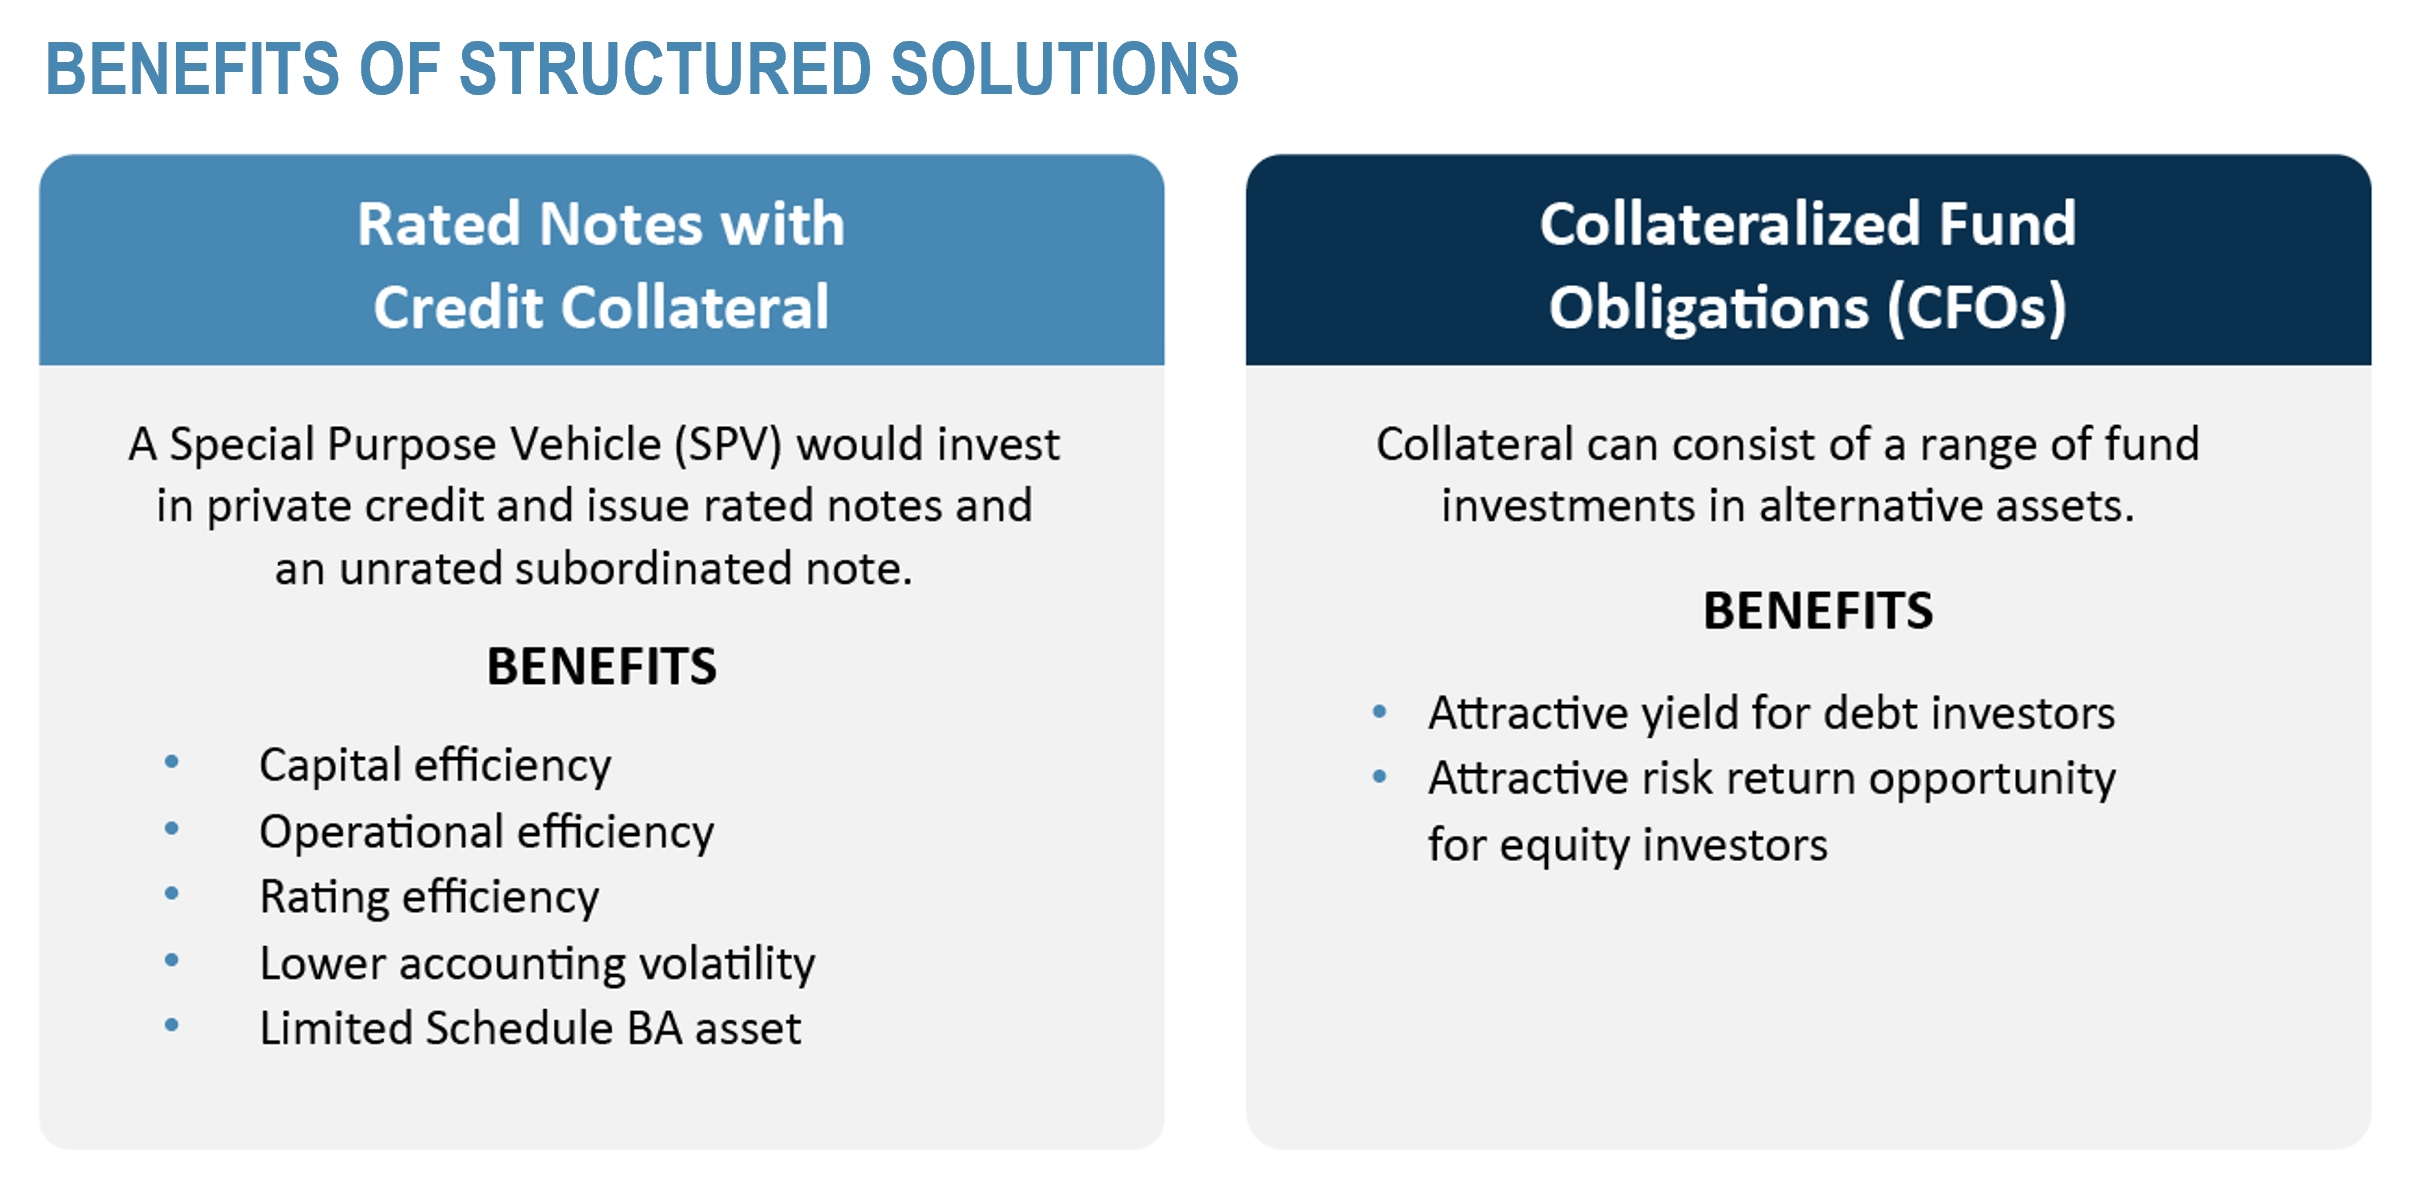 Benefits of structured solutions